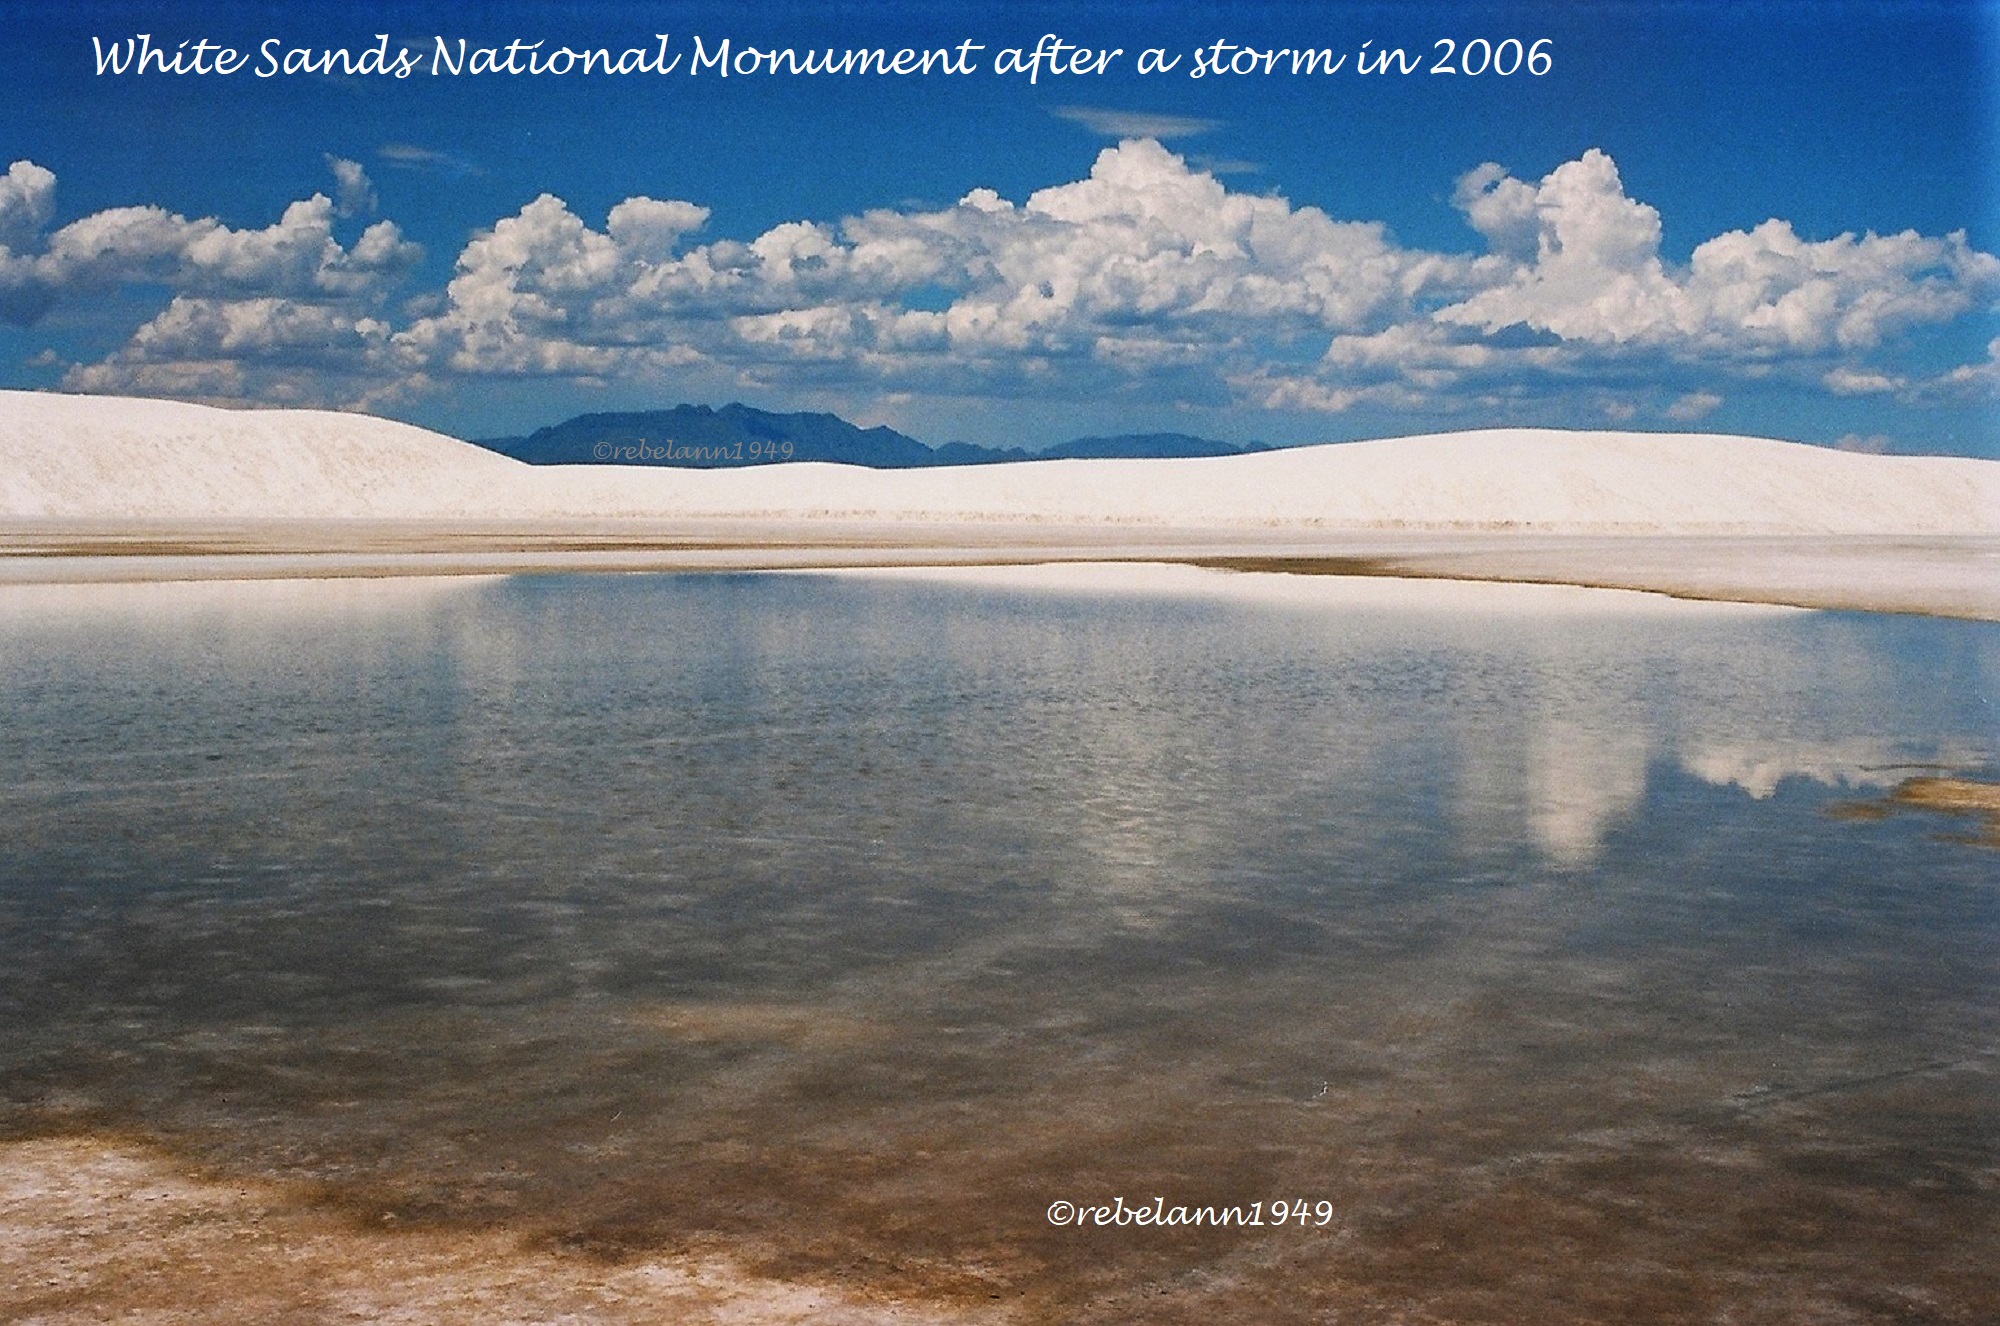 White Sands National Monument after a storm, I took this in 2006